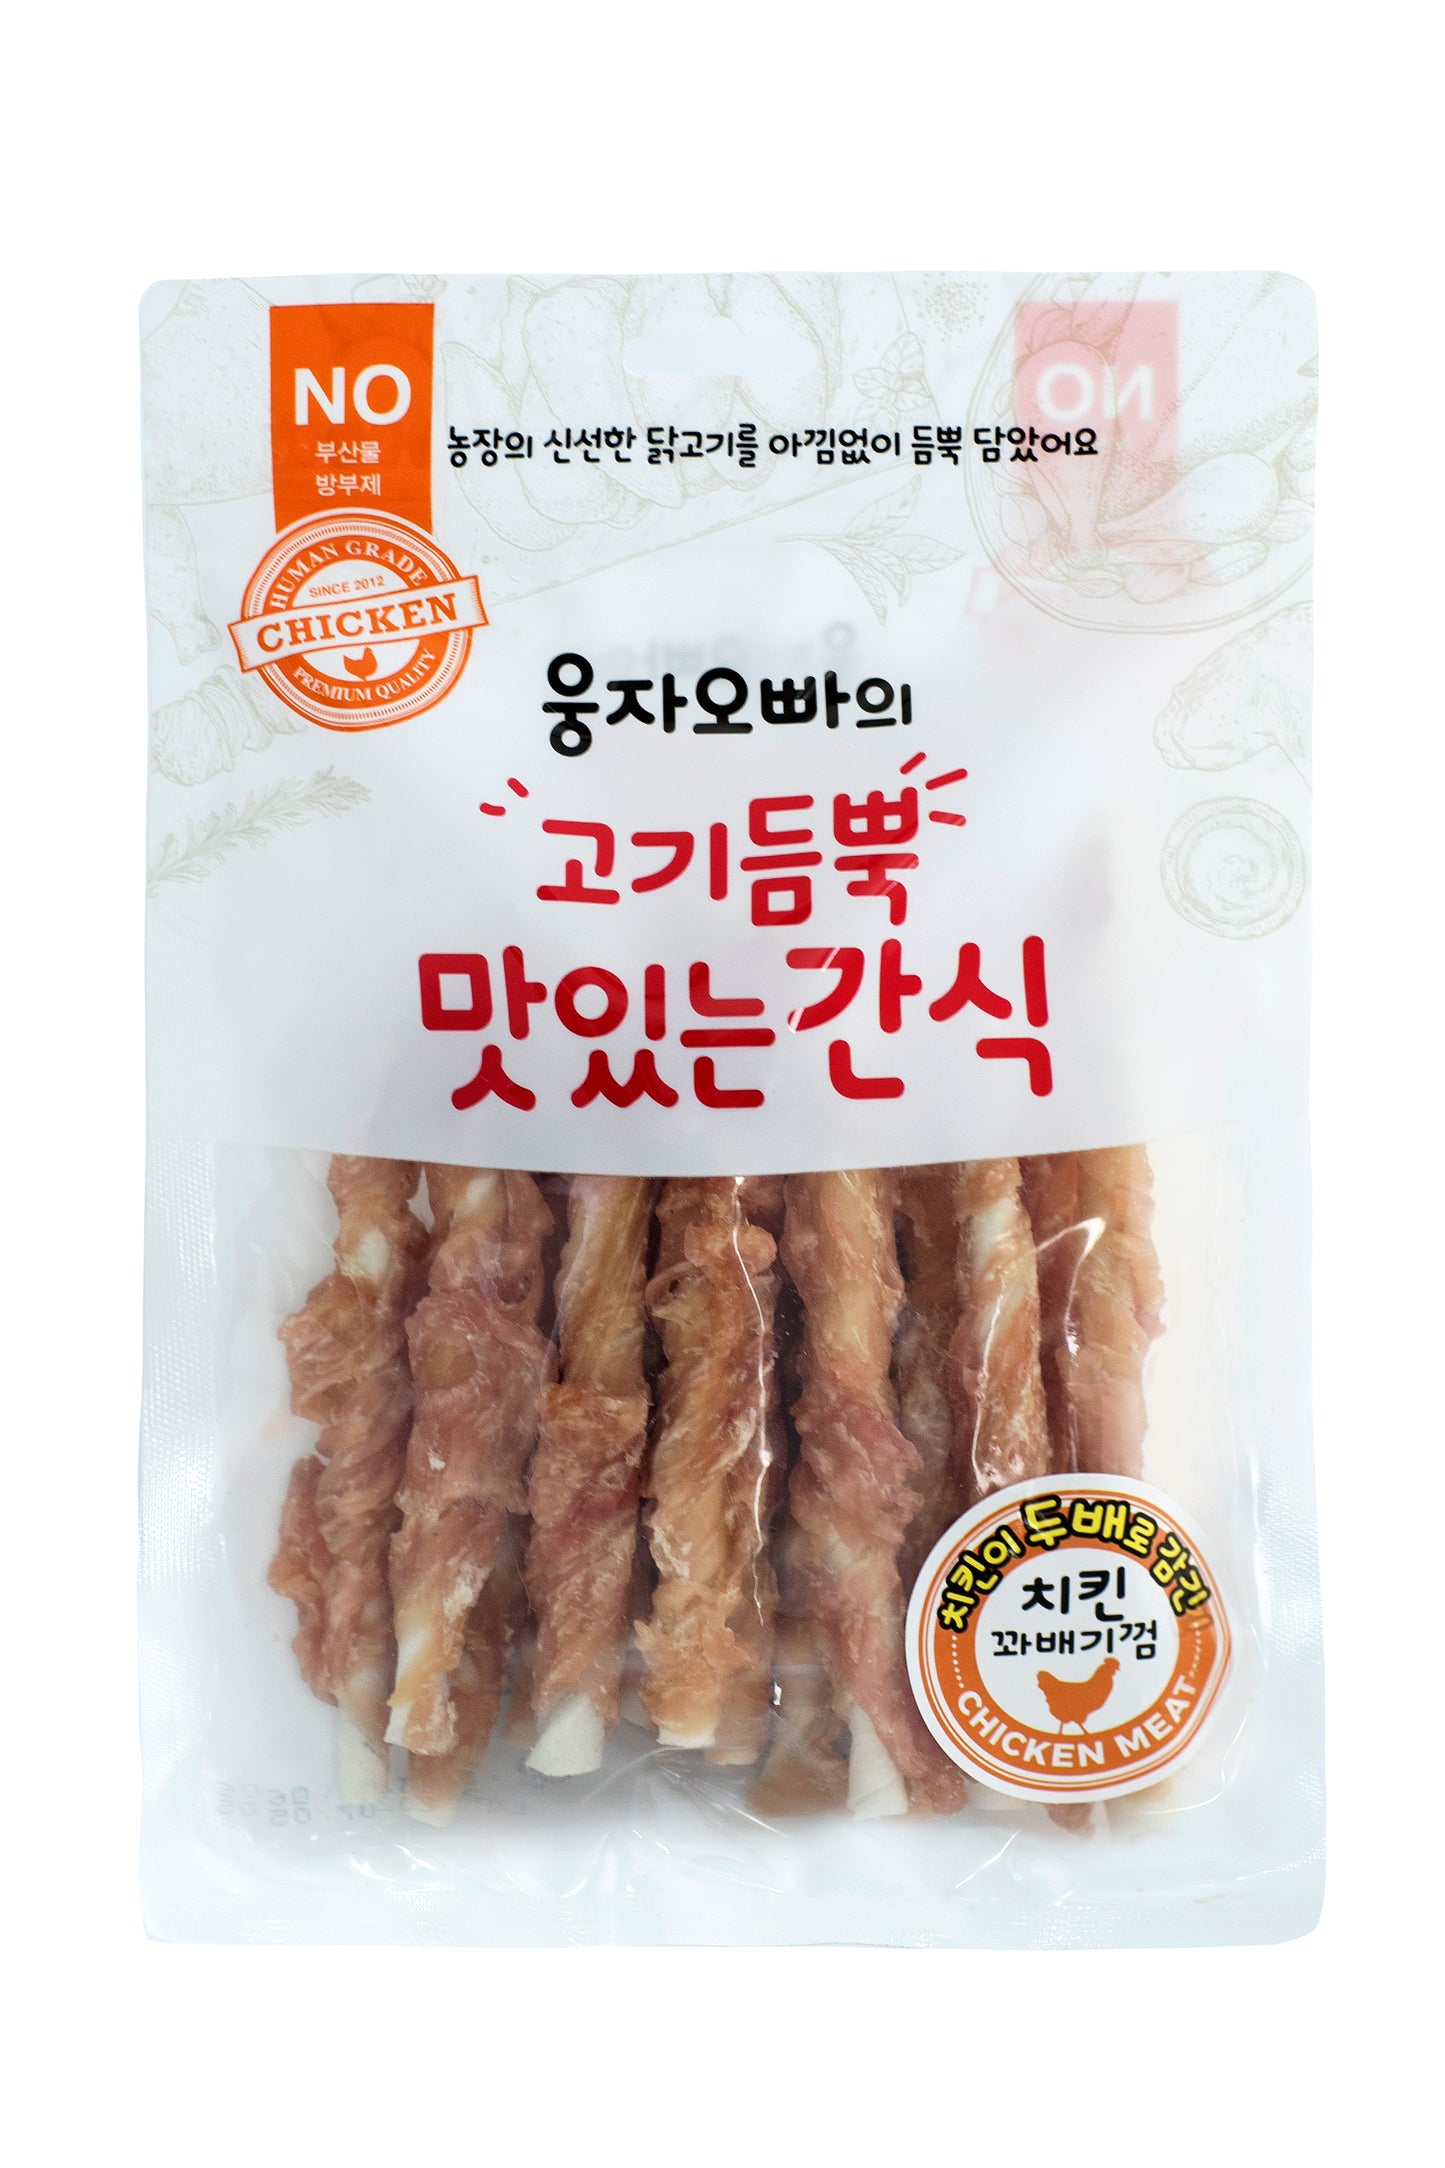 Ungja oppa's meat-filled delicious snack chicken twist chewing gum 210g pet dog snack beef jerky